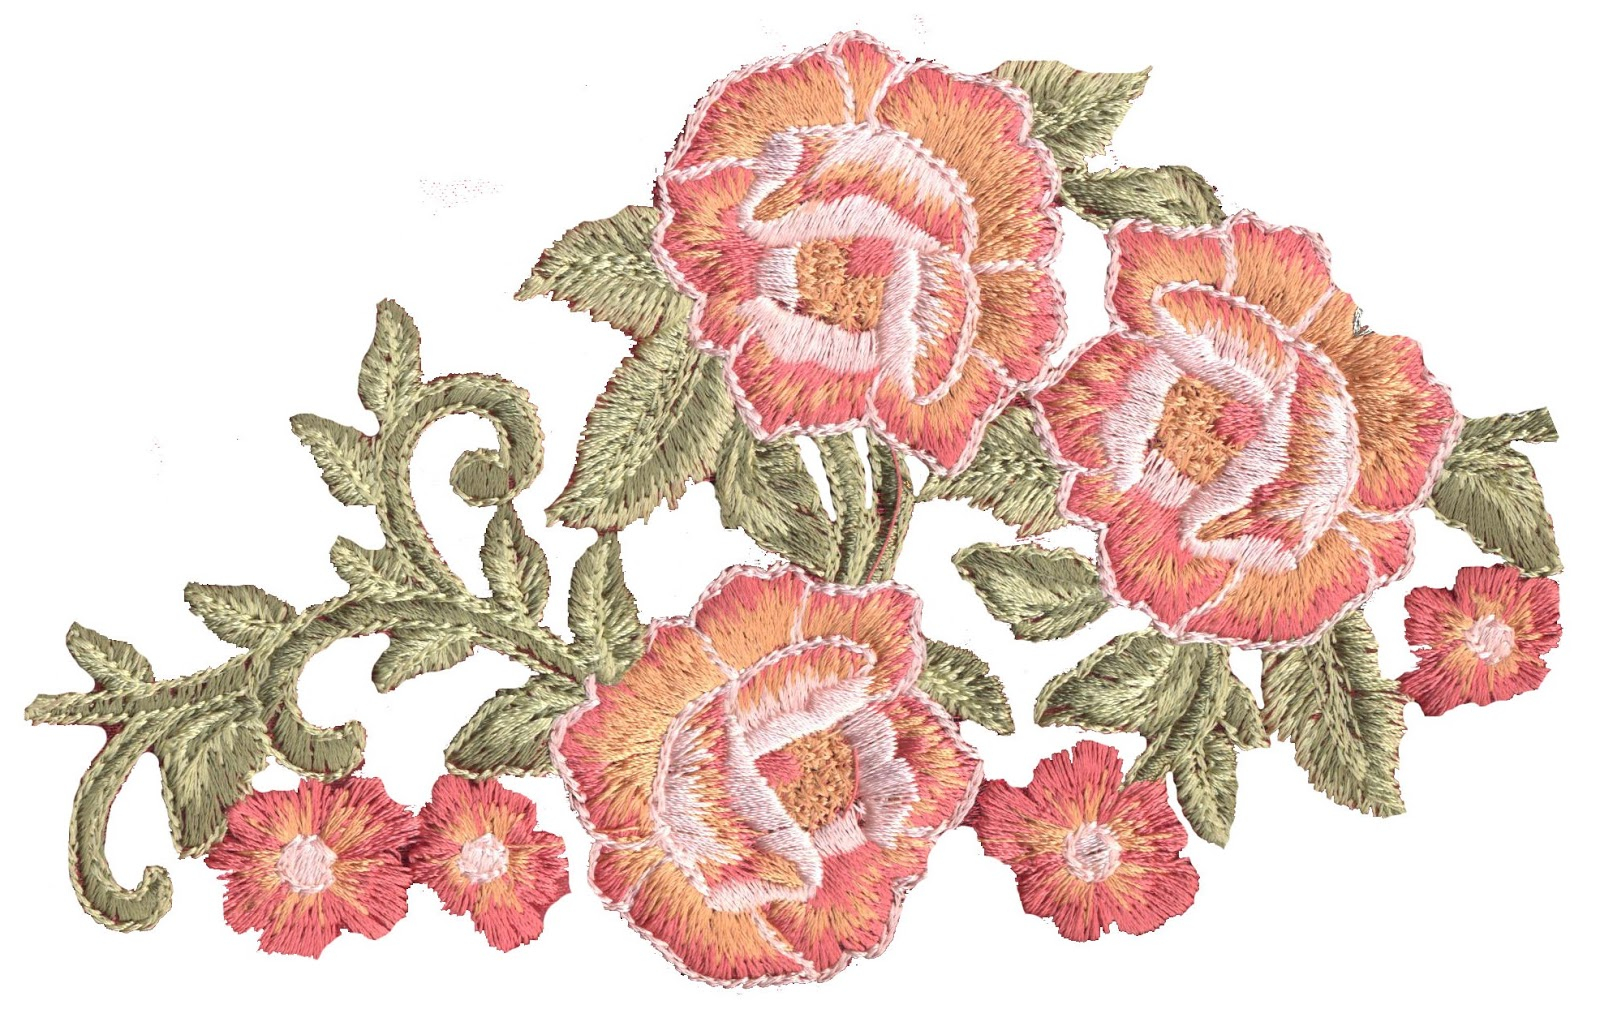 Flower Embroidery Patterns Flower Embroidery Patterns Wilcom Embroidery Designer